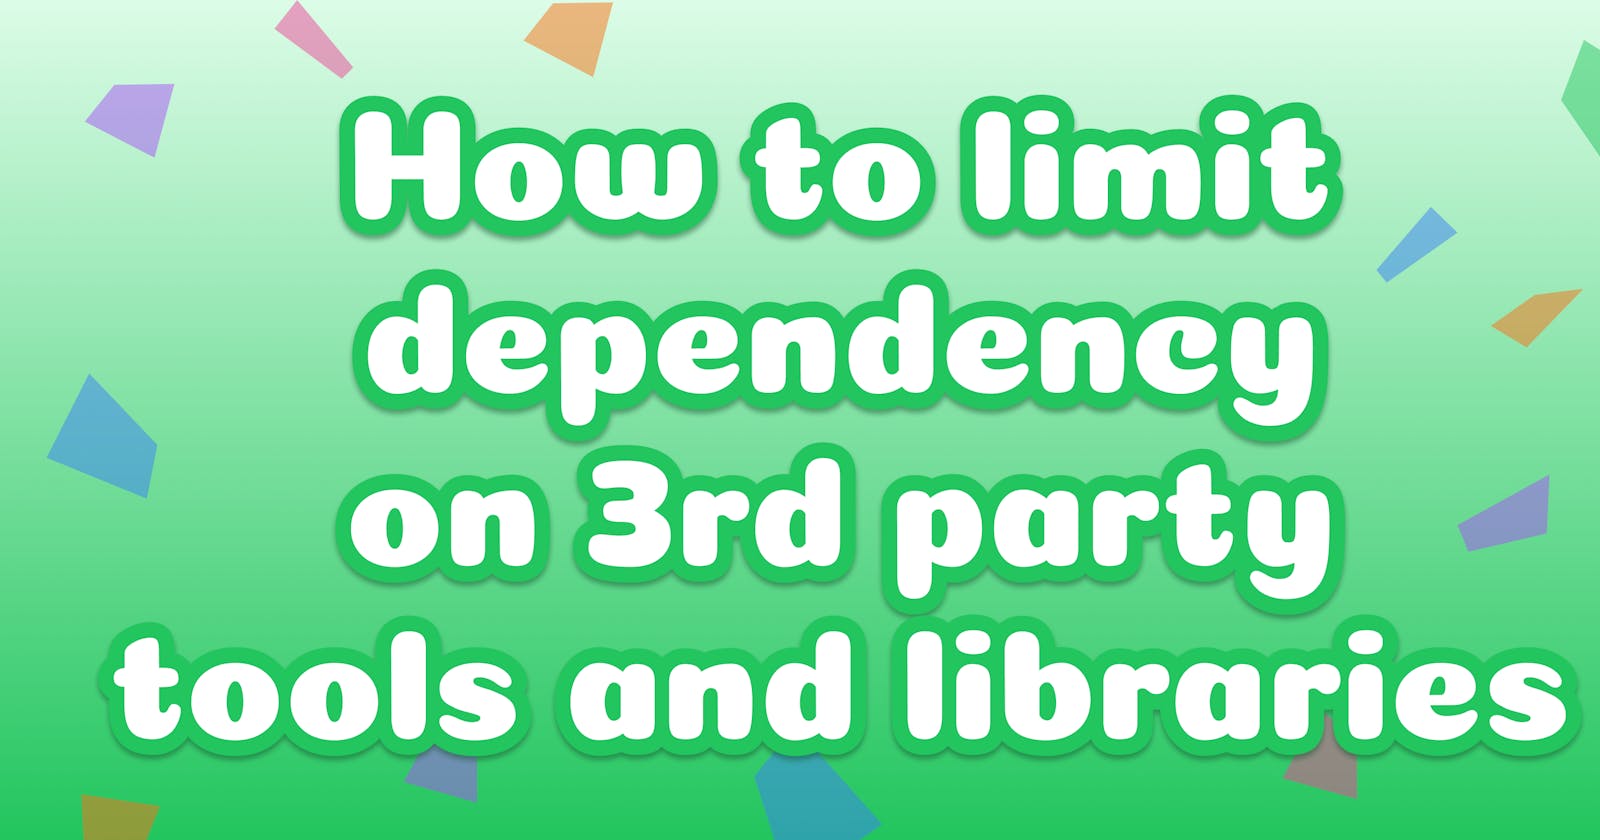 How to limit dependency on 3rd party tools and libraries